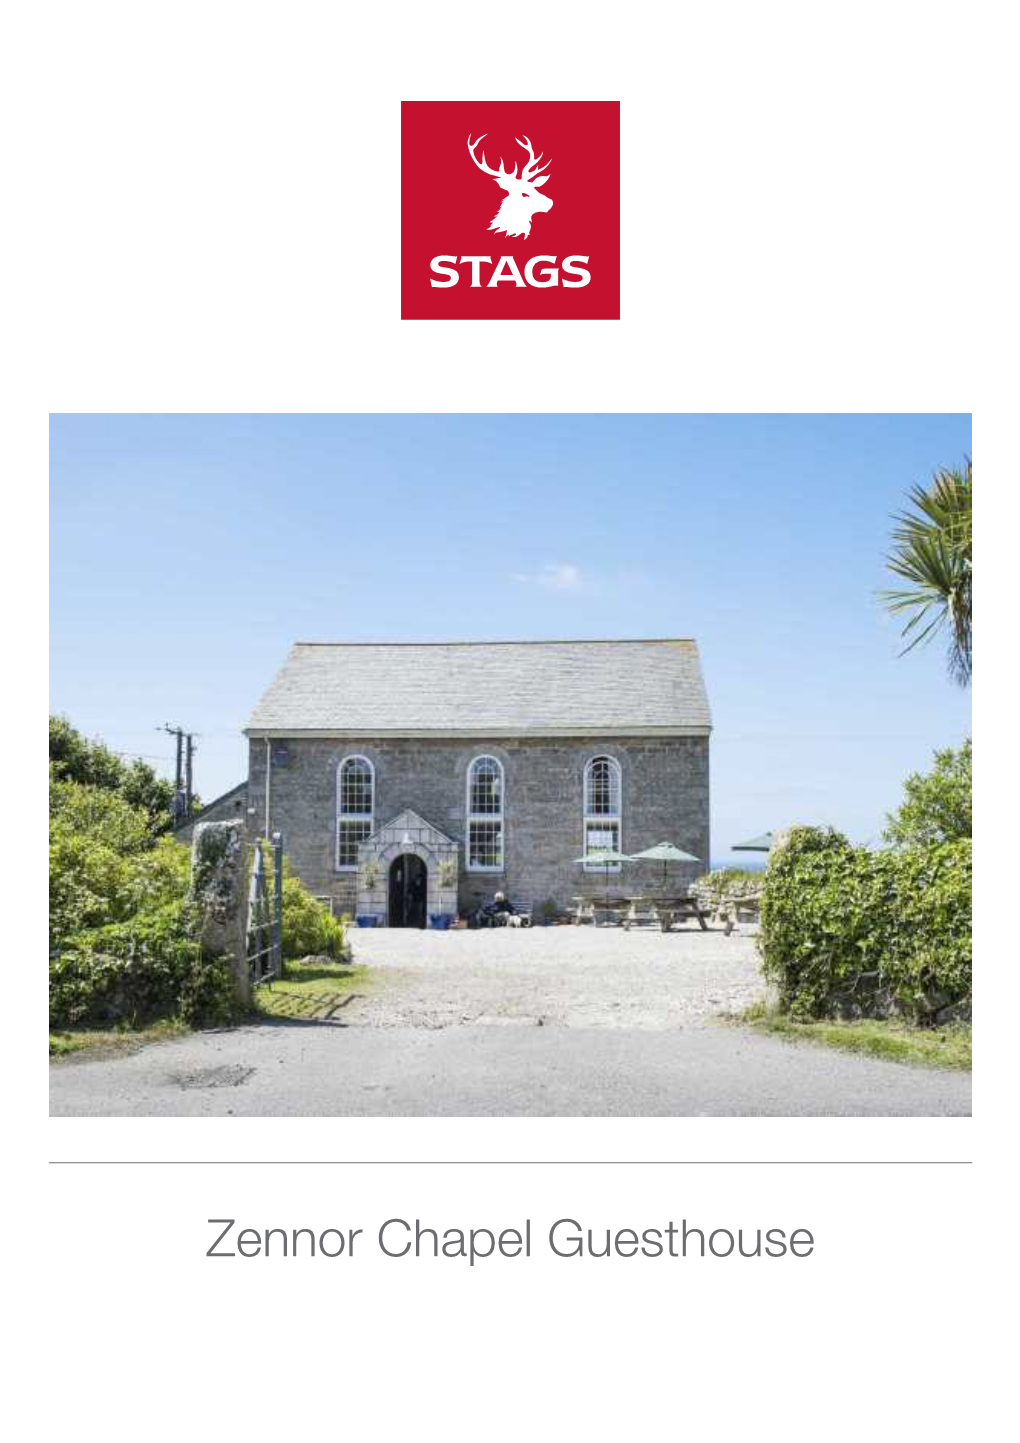 Zennor Chapel Guesthouse Zennor Chapel Guesthouse Zennor, St Ives, Cornwall